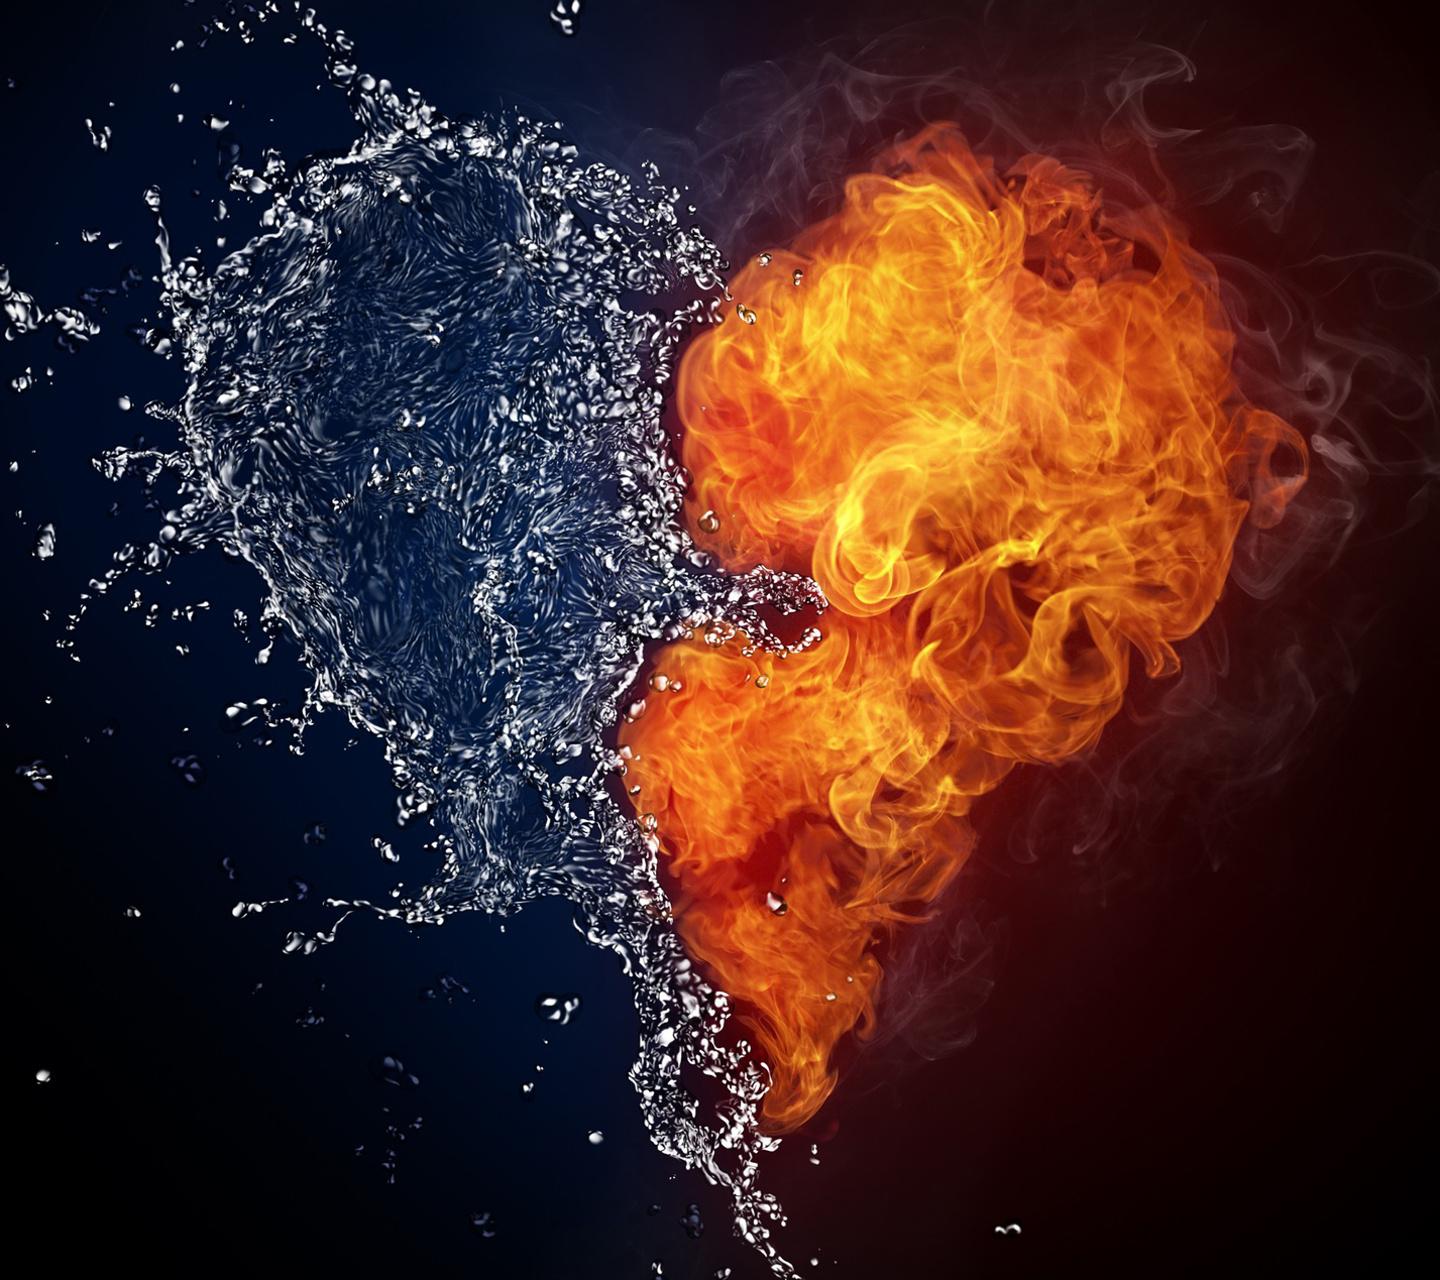 Download Burning heart hd wallpaper for iphone - Heart and rose hd wallpaper  for your mobile cell phone